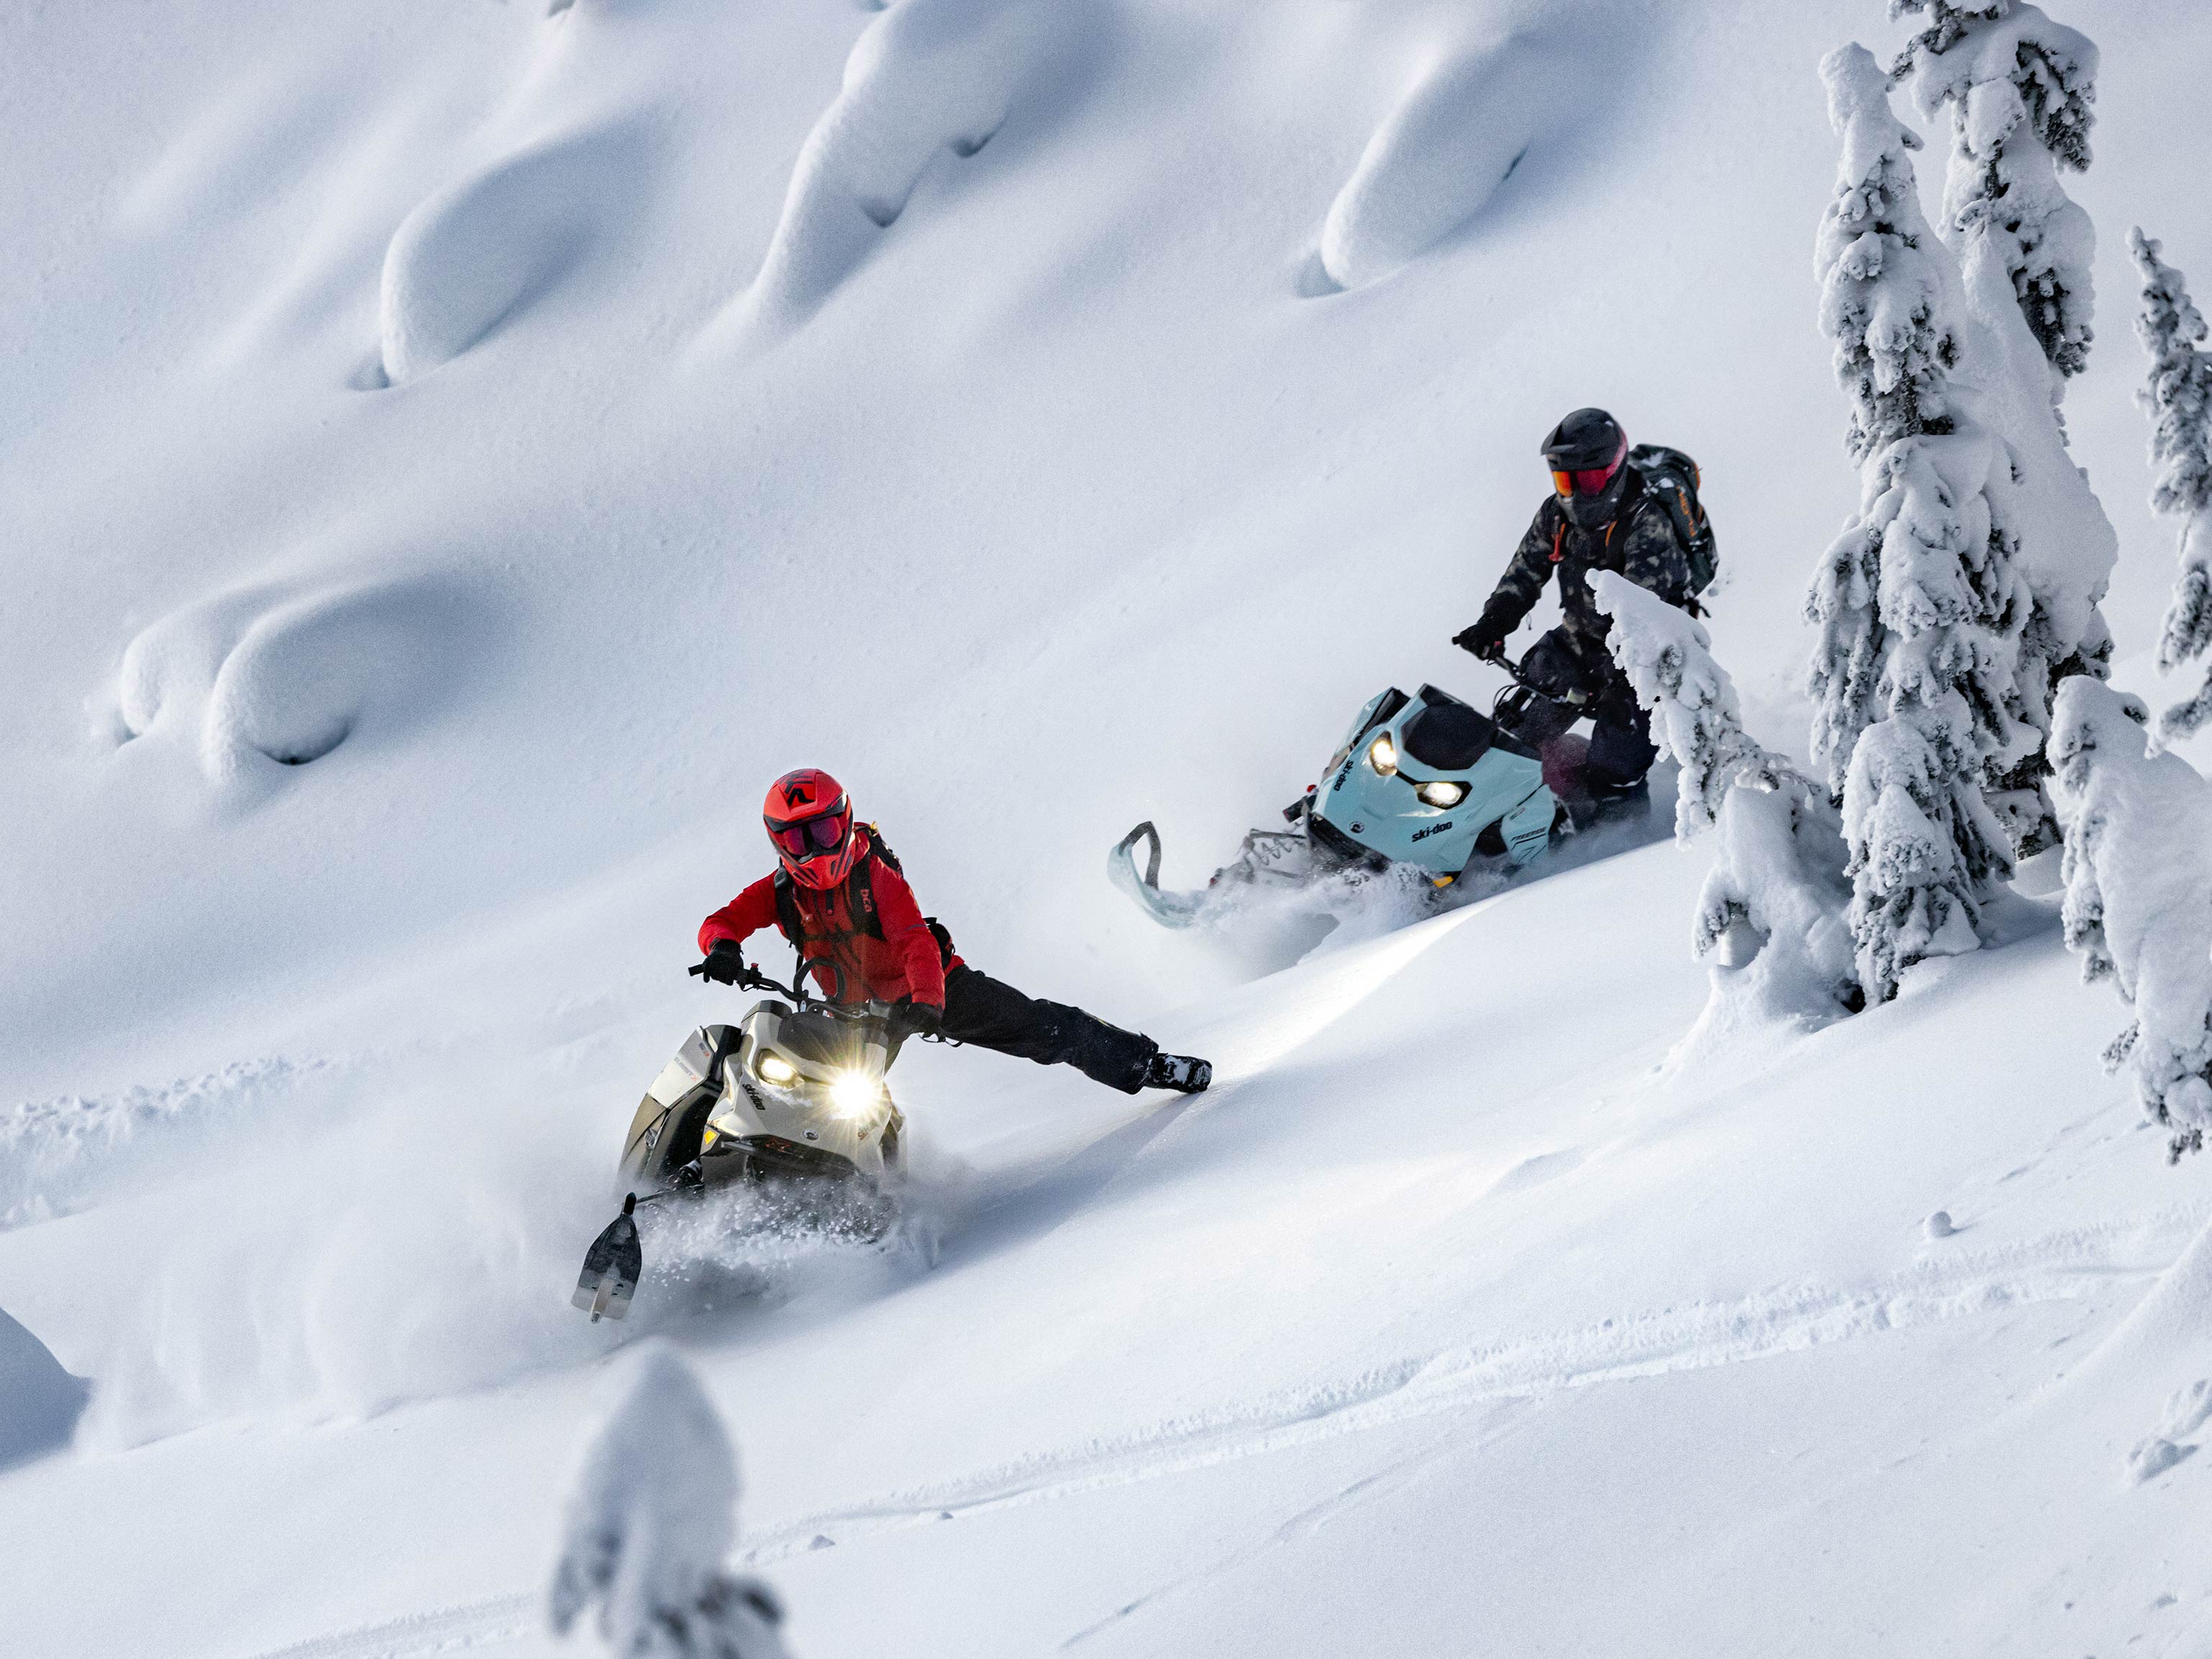 Two riders driving their Ski-Doo deep snow snowmobile in the mountain